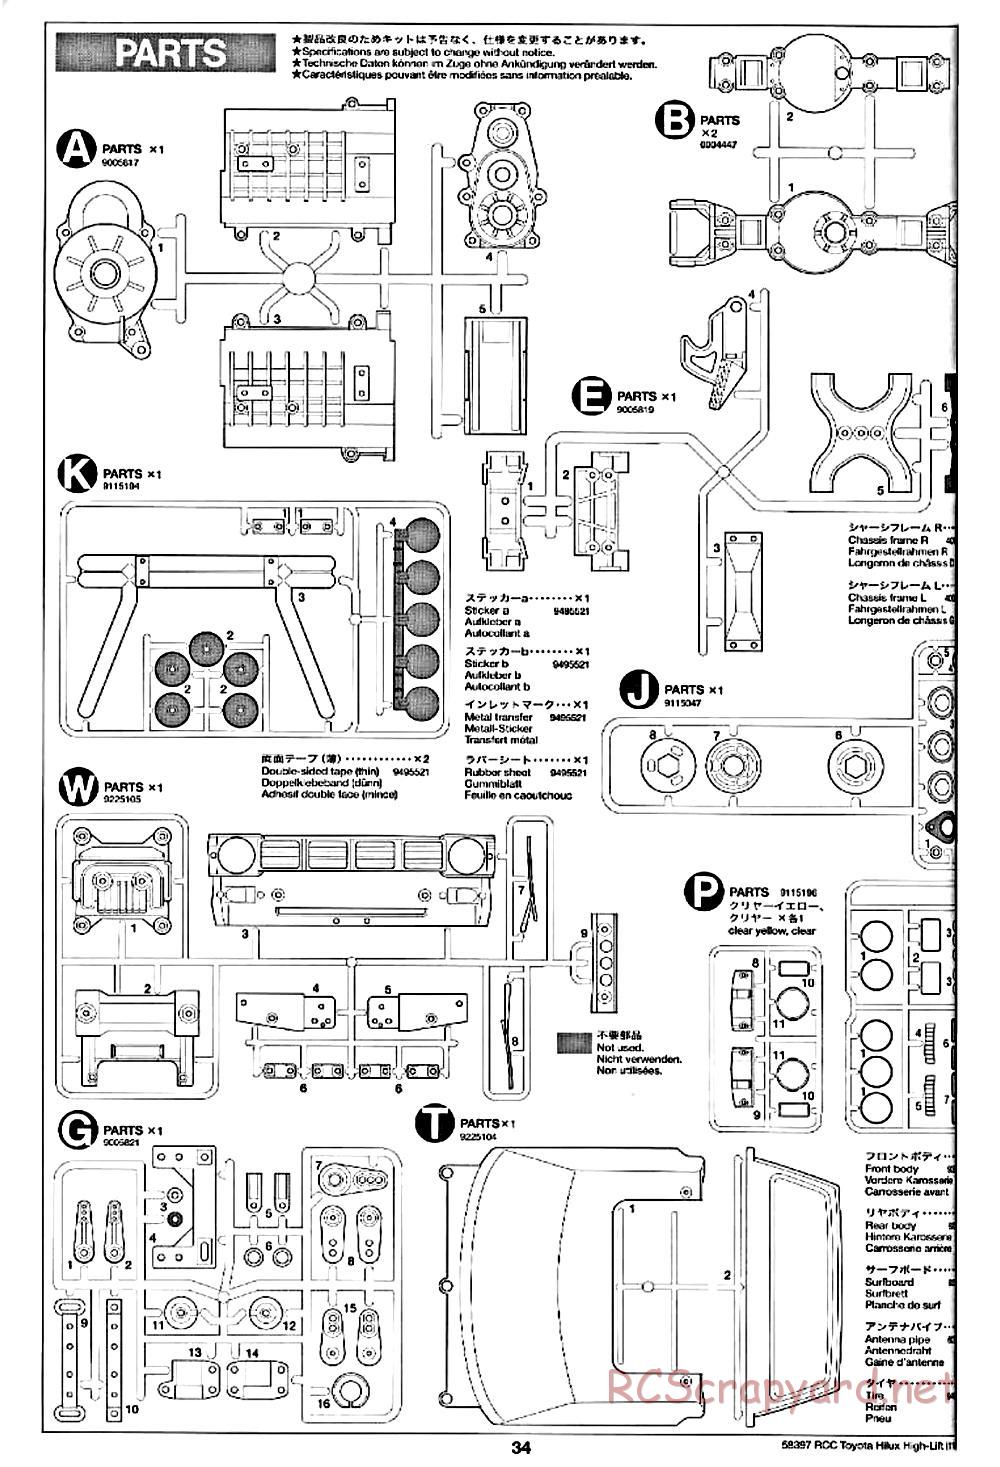 Tamiya - Toyota Hilux High-Lift Chassis - Manual - Page 29